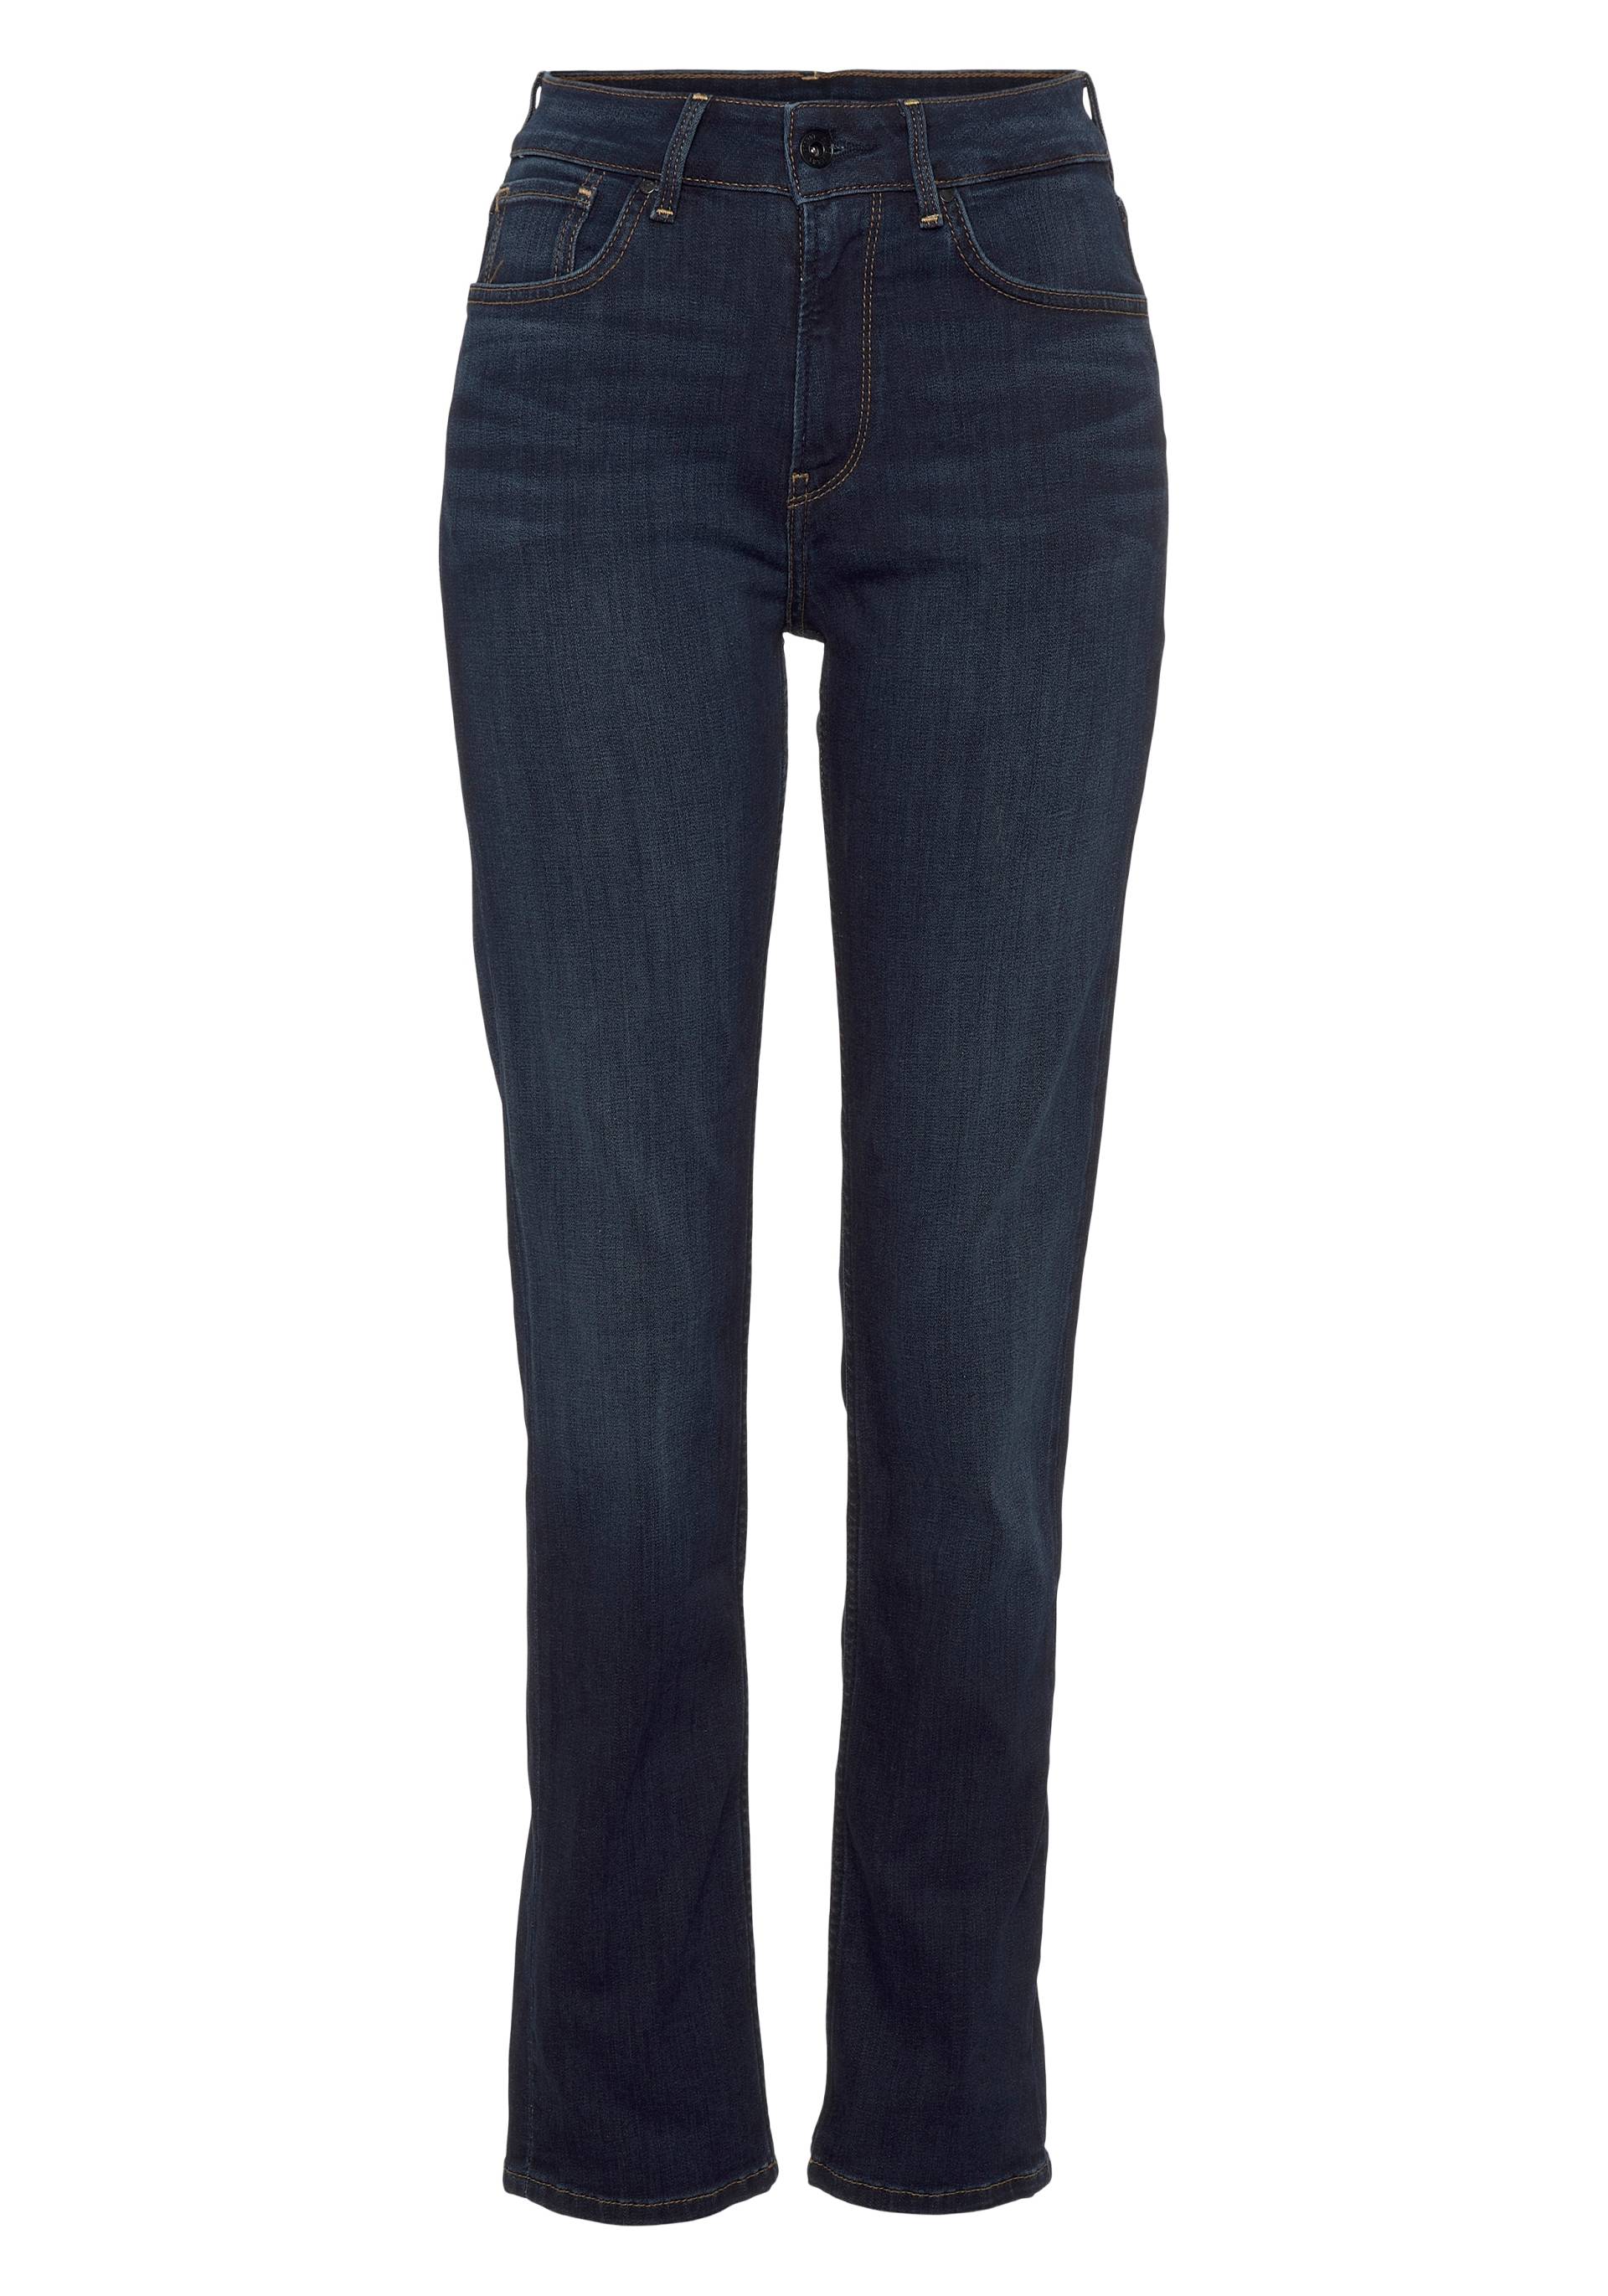 Pepe Jeans Straight-Jeans »MARY«, (1 tlg.) von Pepe Jeans